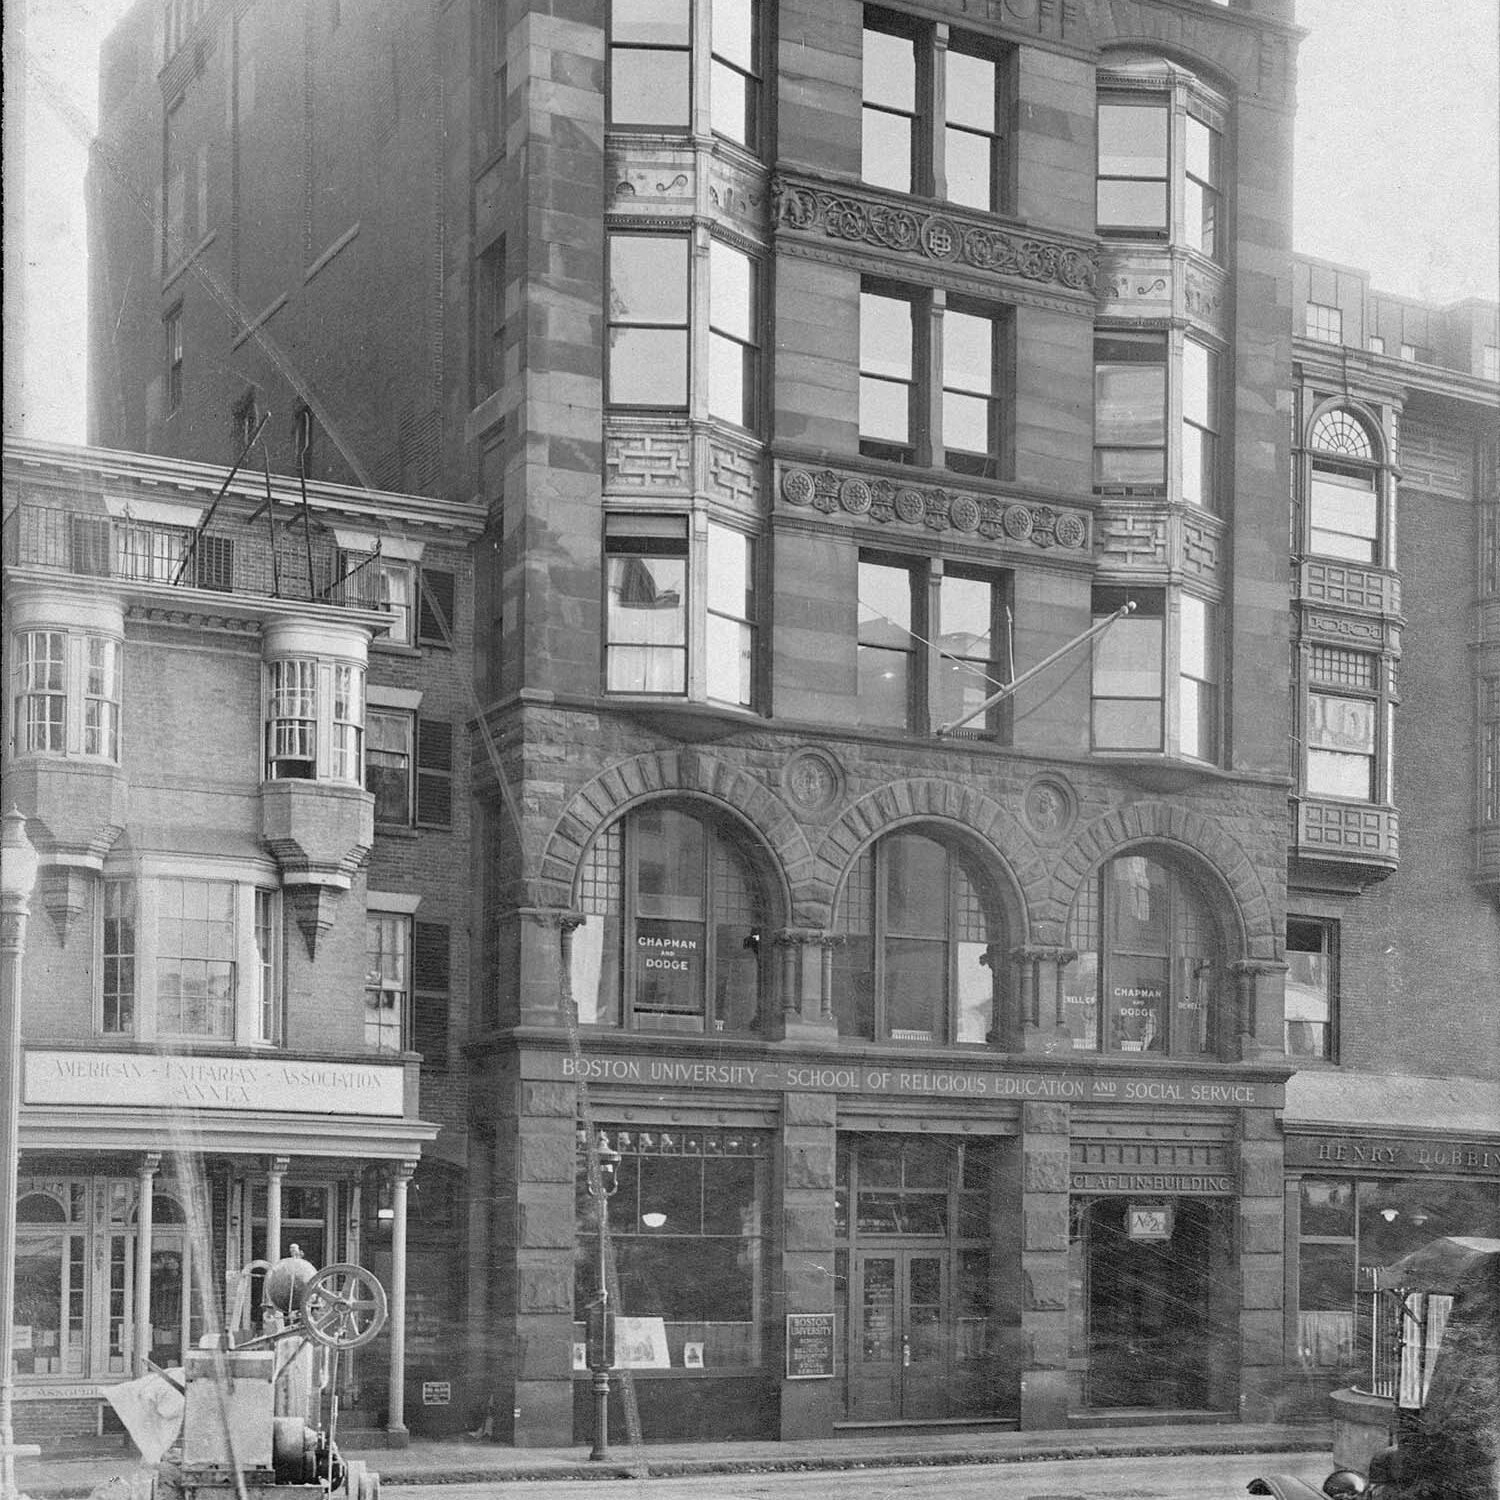 Black and White Photo: A large stone building in downtown Boston in the late 1800's